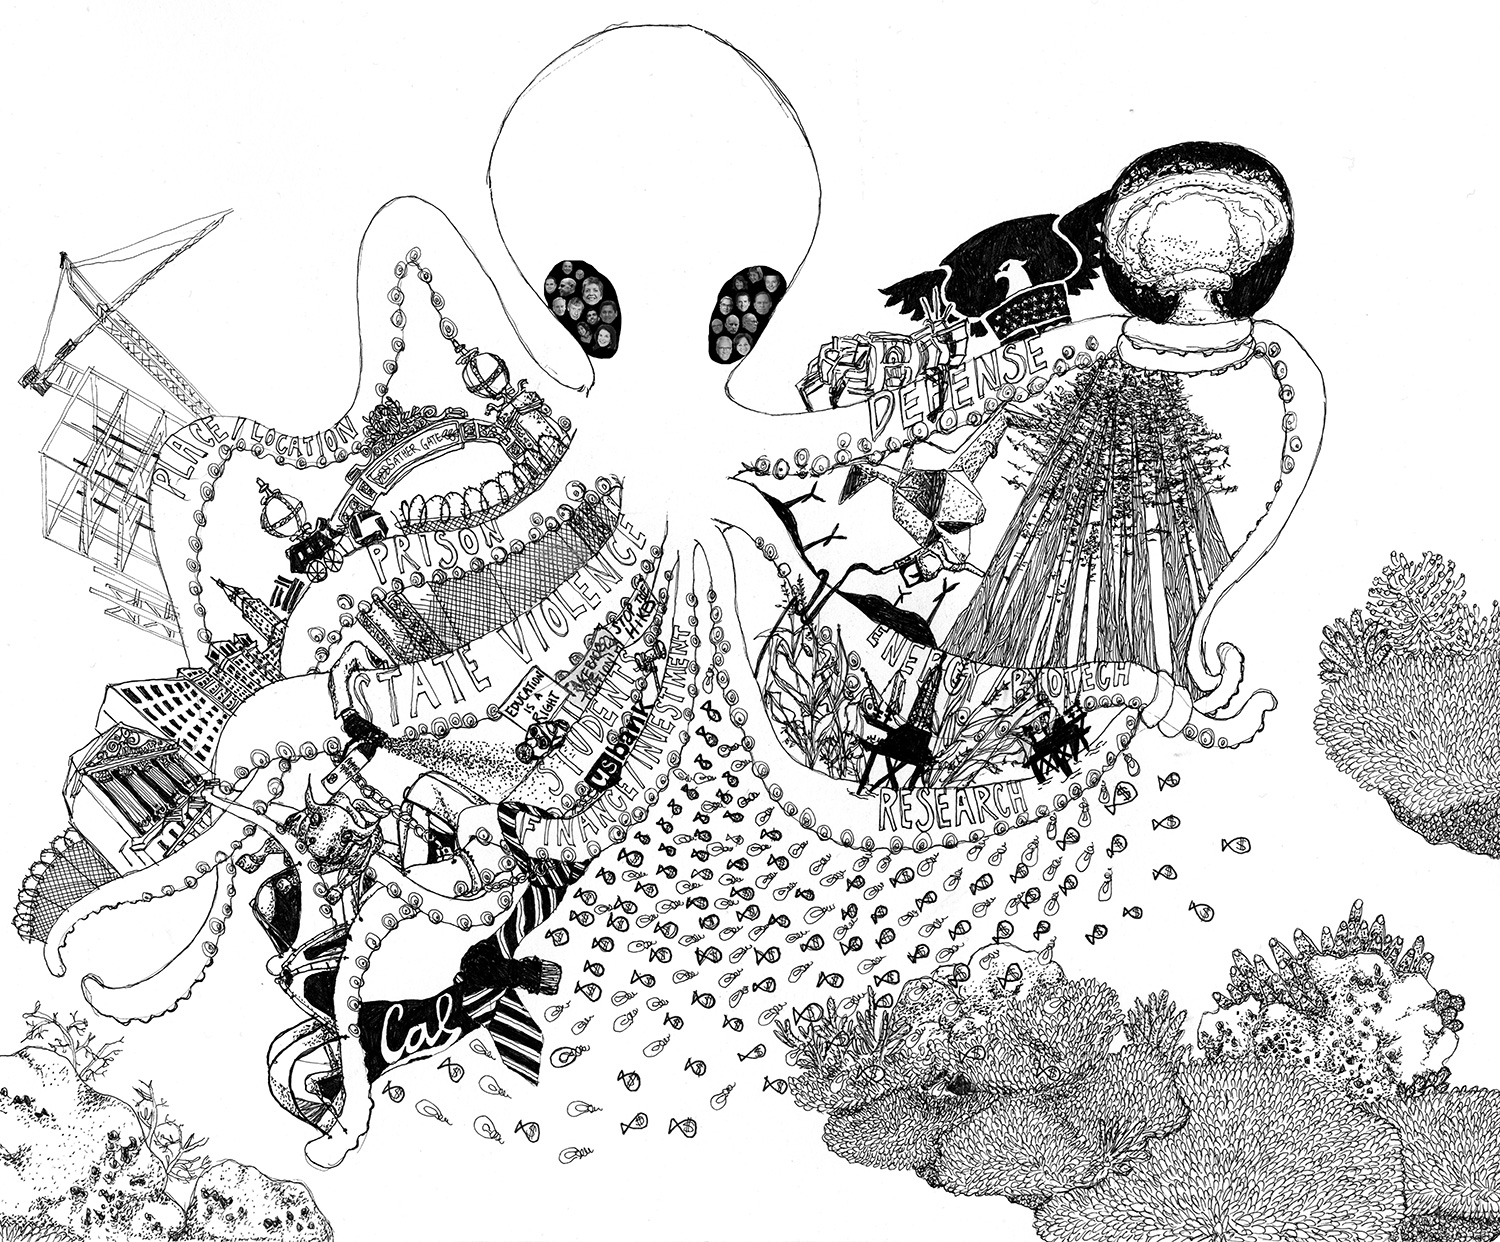 The Octopus, drawing by Nicci Yin Created as part of the presentation “The Octopus: Cognitive Capitalism and the University” with Natalia Cecire and Miriam Neptune at The Scholar & Feminist 2015: Action on Education